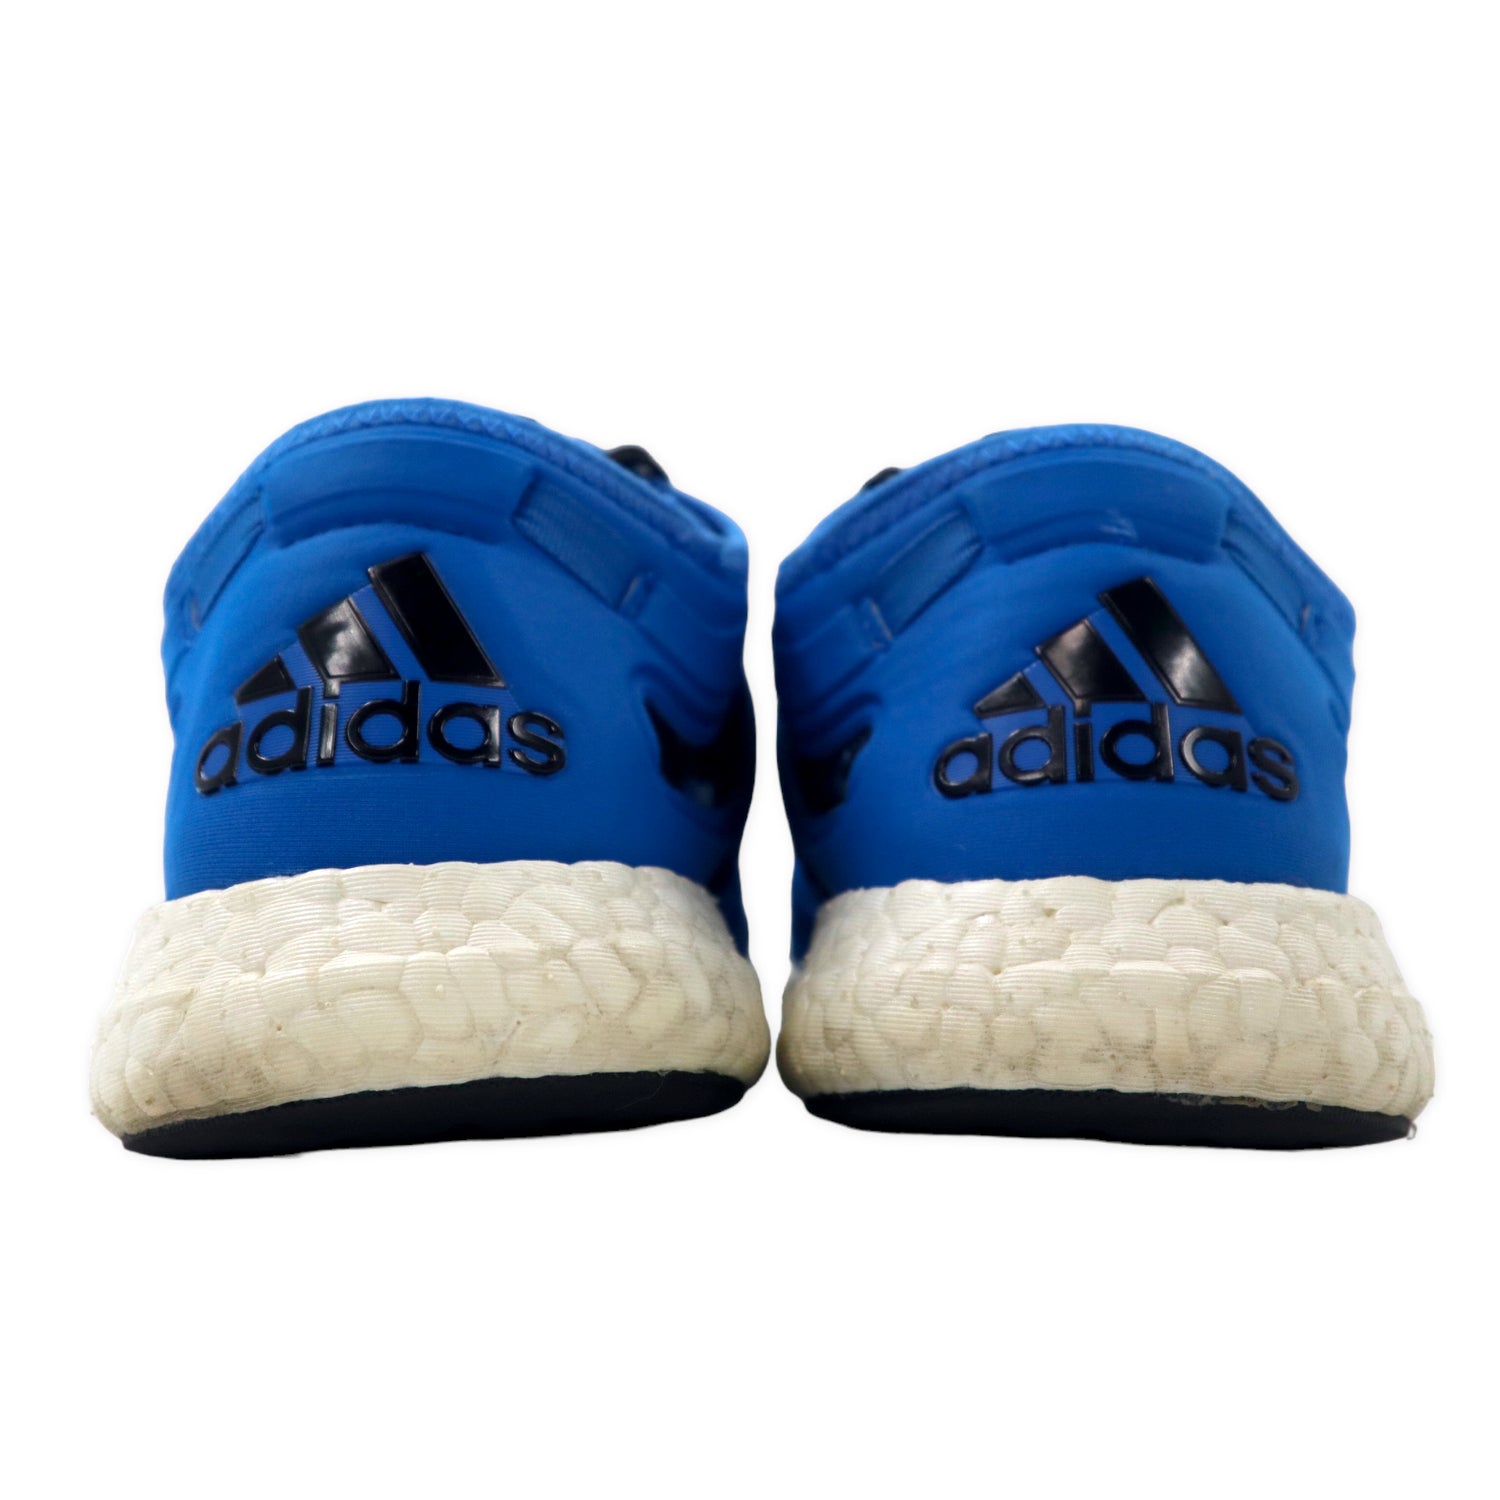 Adidas climat RK boost 2 Sneakers US8.5 Blue Climachill RK BOOST 2 